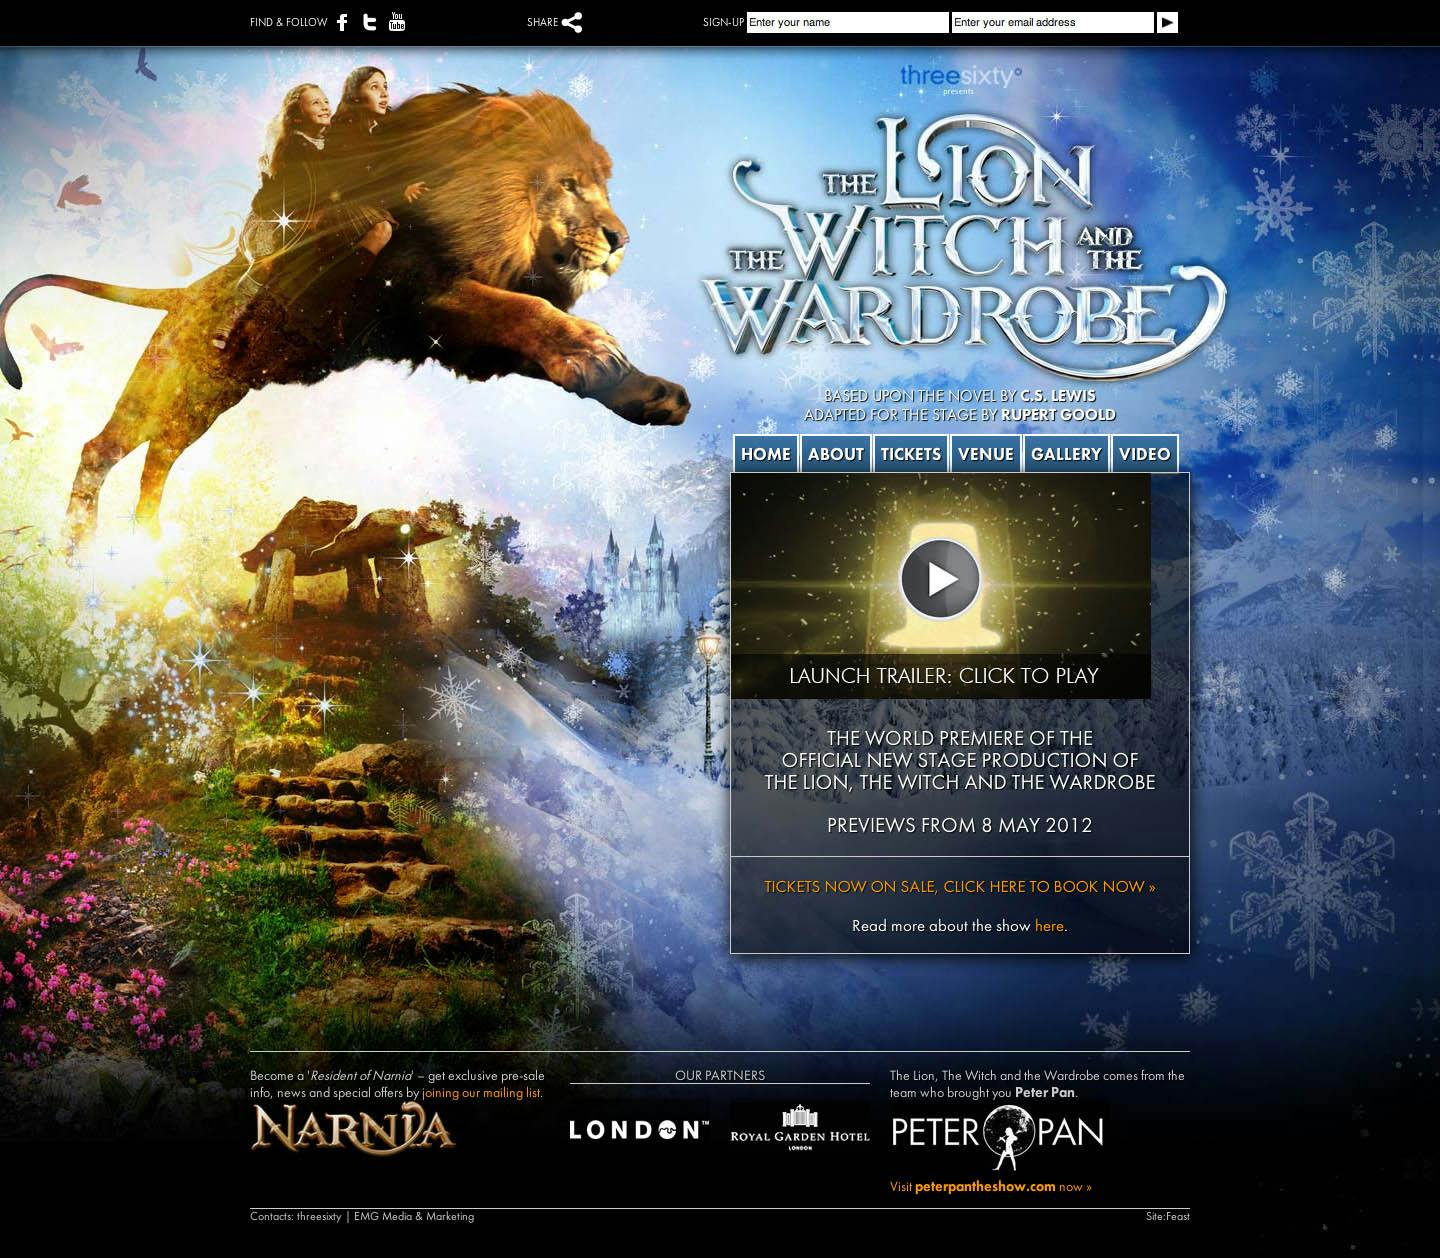 The Lion, the Witch and the Wardrobe Website Screenshot